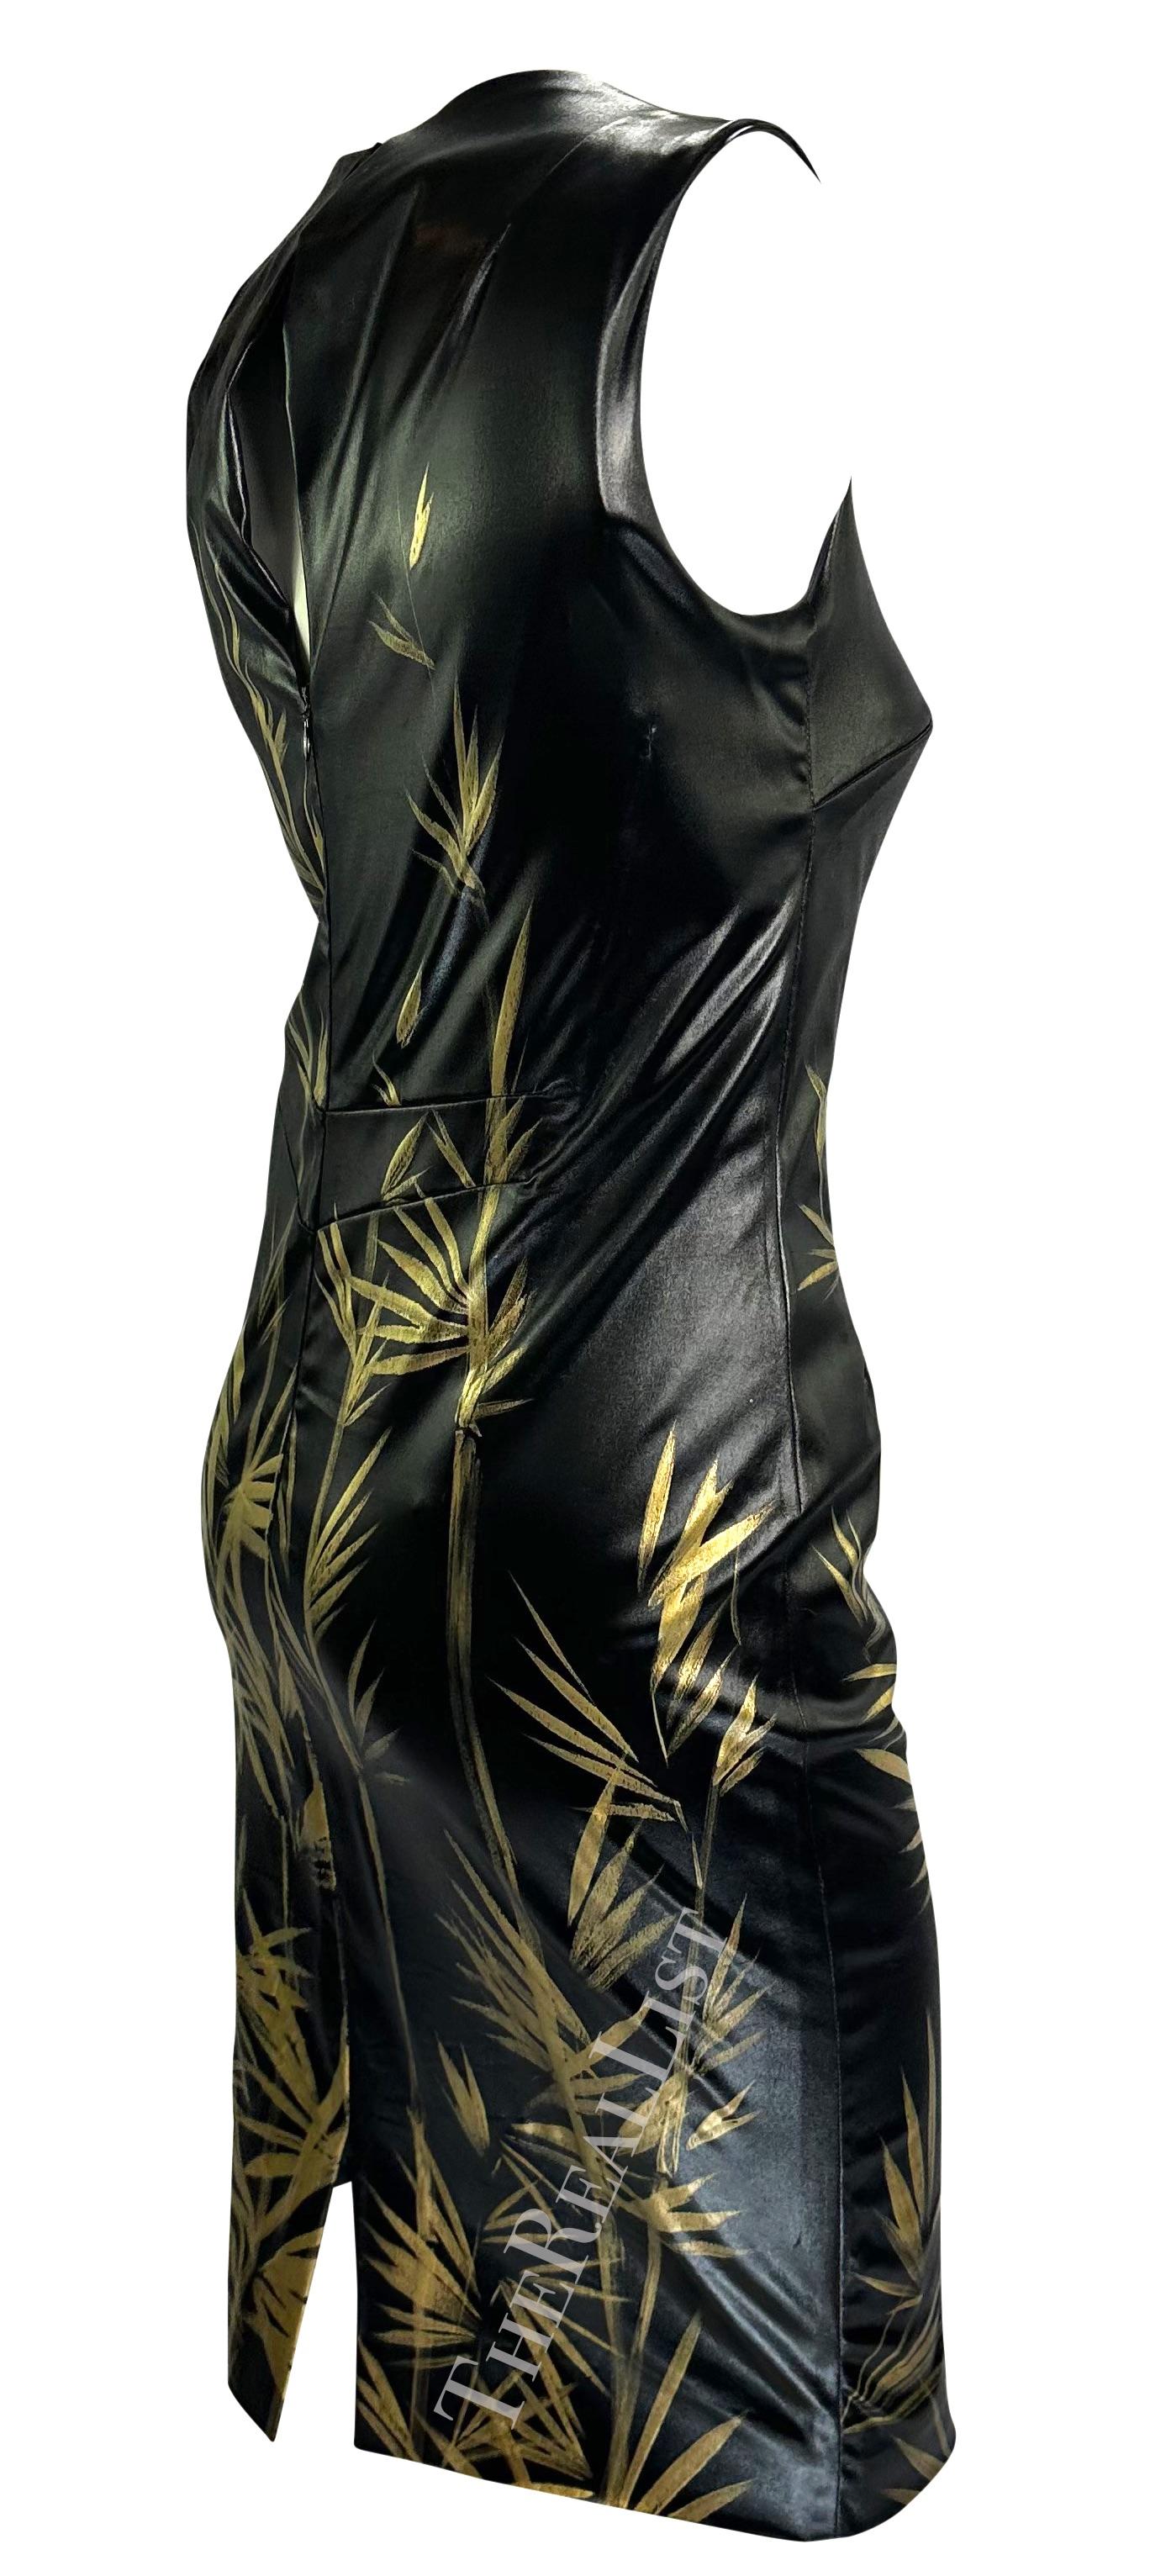 Women's F/W 1999 Dolce & Gabbana Black 'Wet Look' Hand-Painted Gold Bamboo Bodycon Dress For Sale